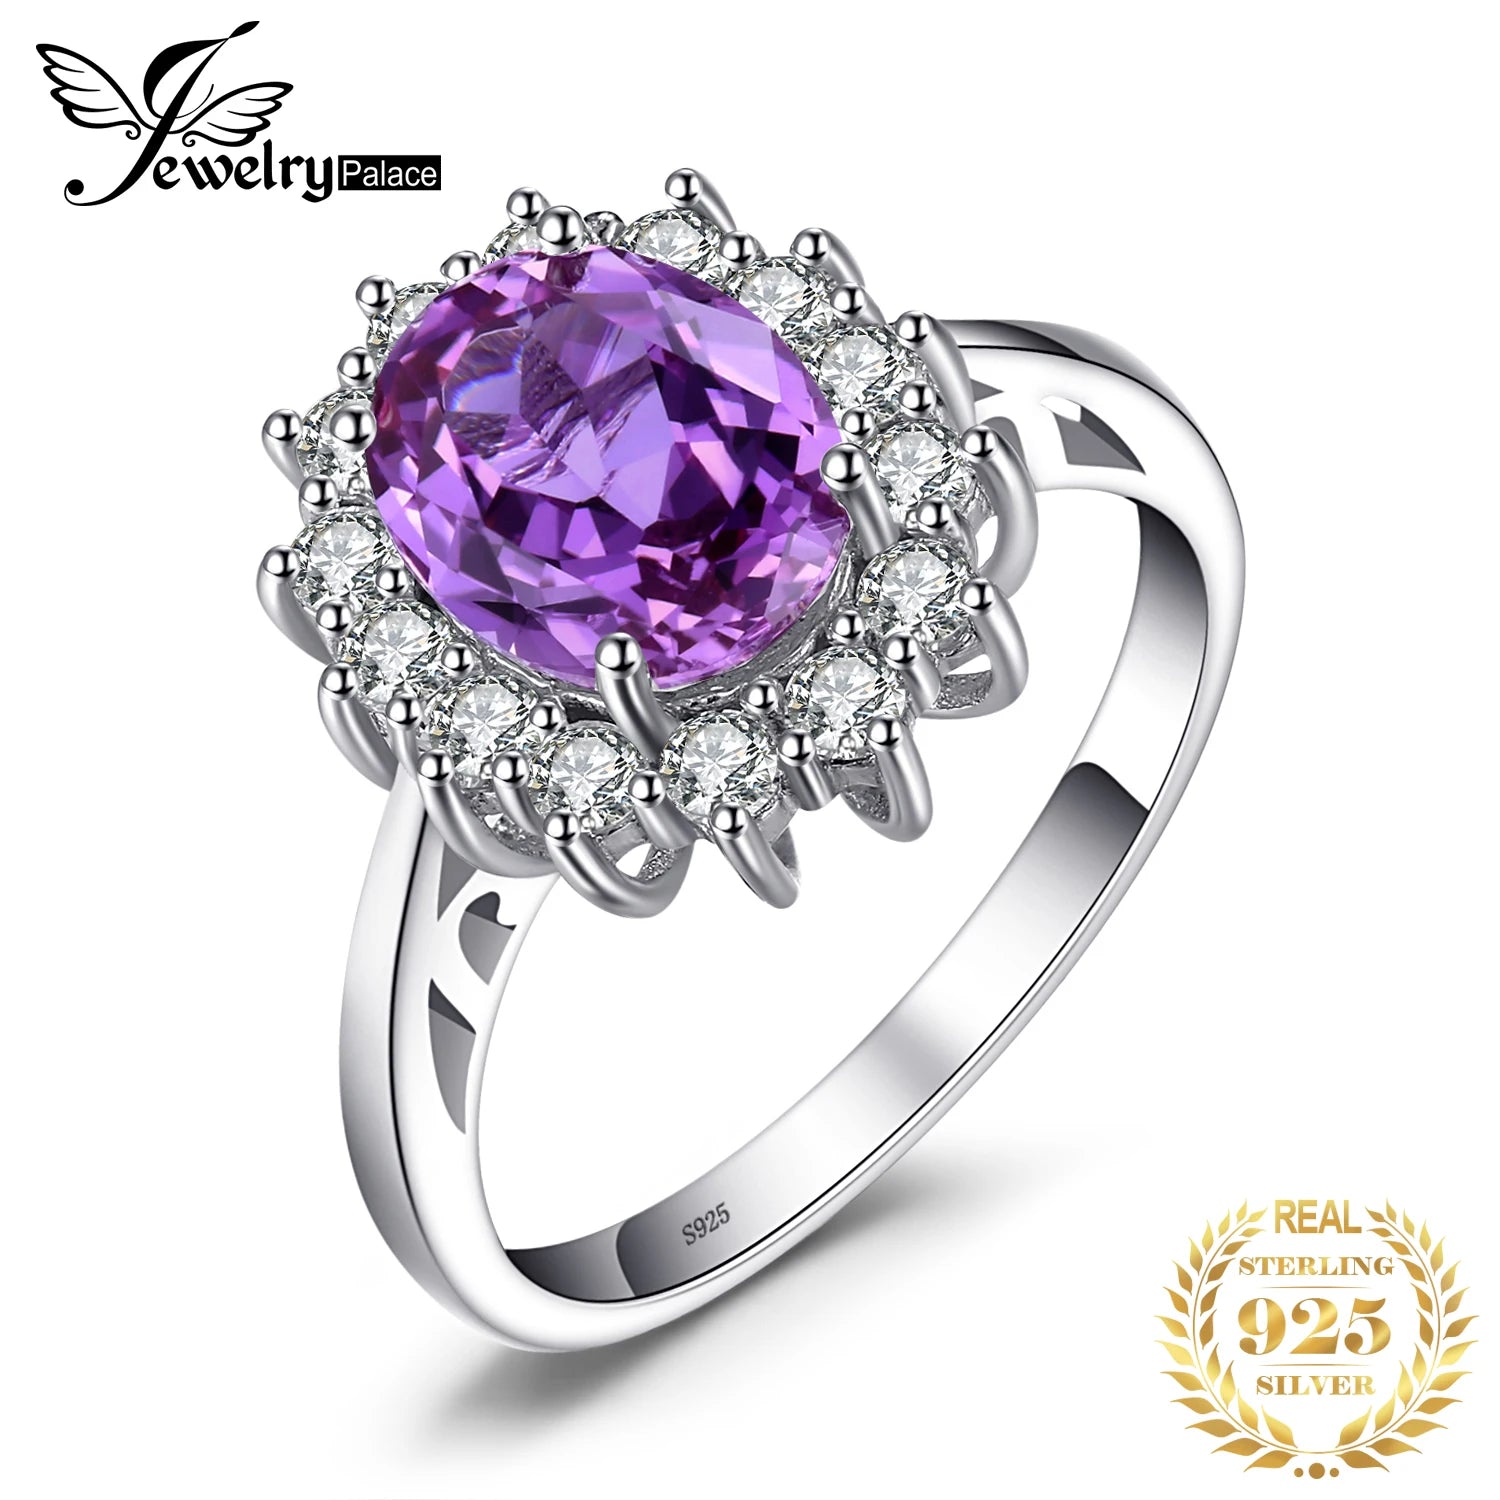 Jewelrypalace Princess Diana 2.6ct Created Alexandrite Sapphire 925 Sterling Silver Engagement Ring for Women Gemstone Jewelry CHINA